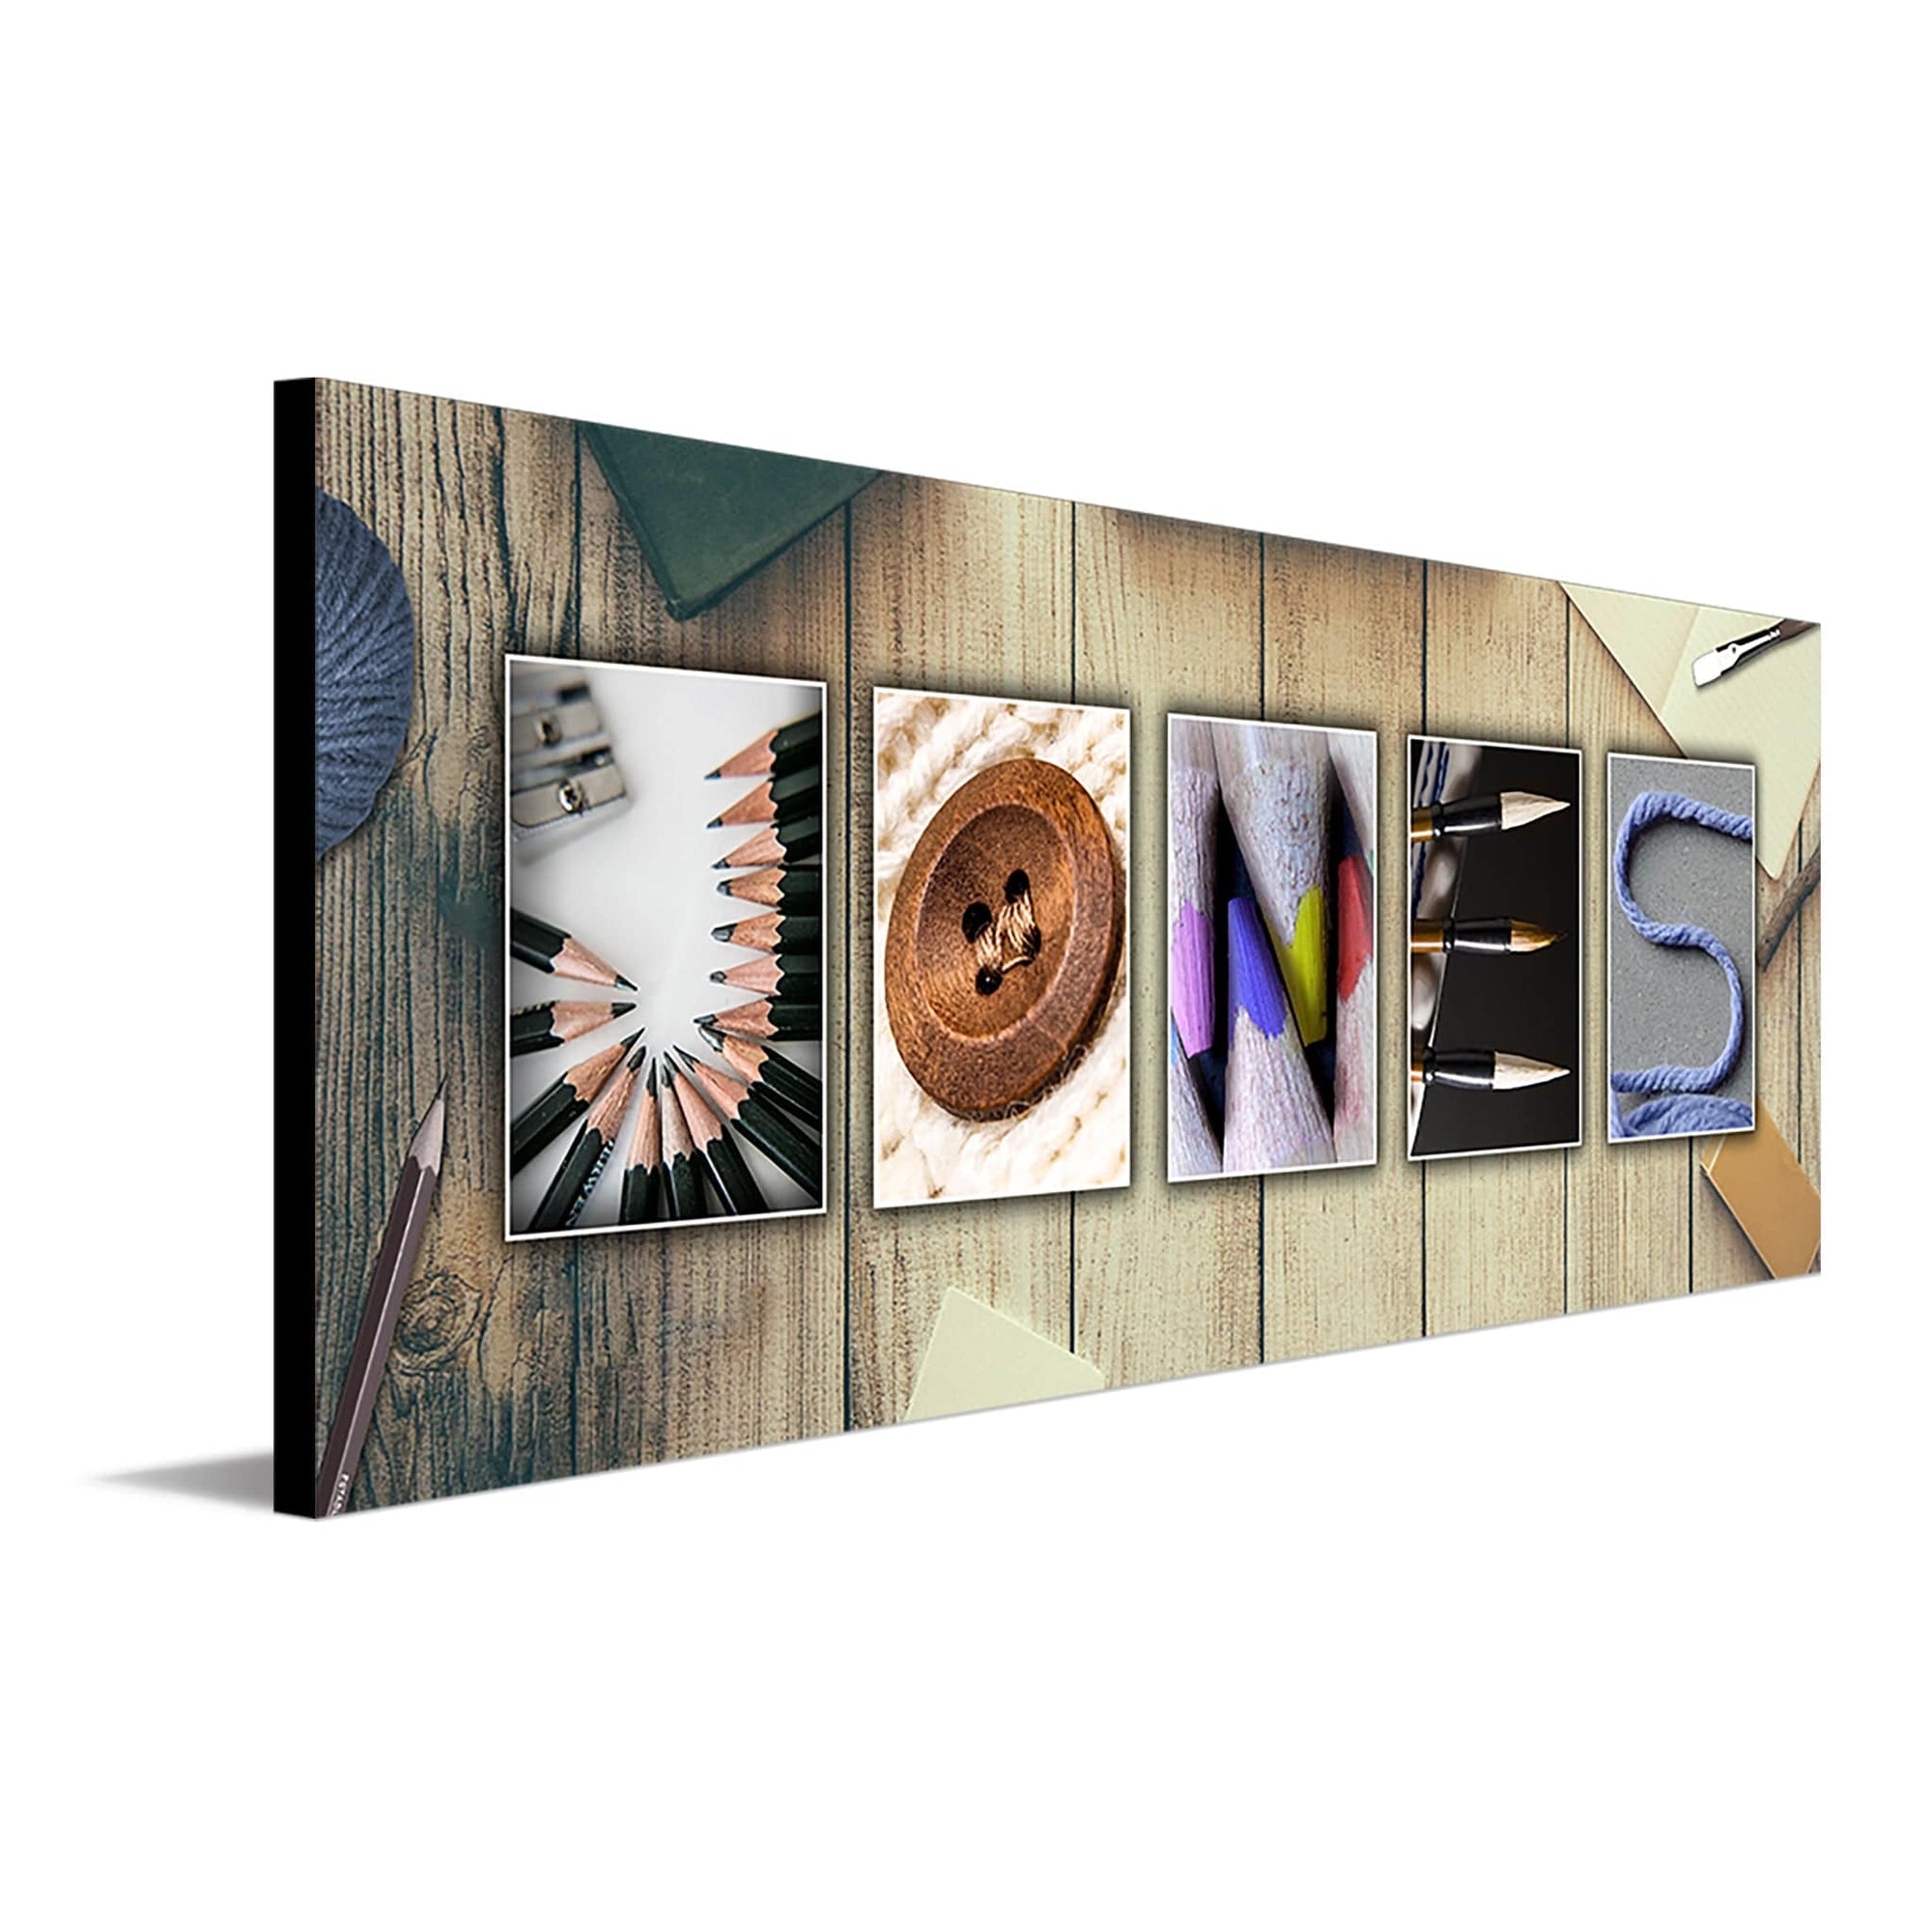 Personal-Prints Crafts & Scrapbooking Personalized Name Art.